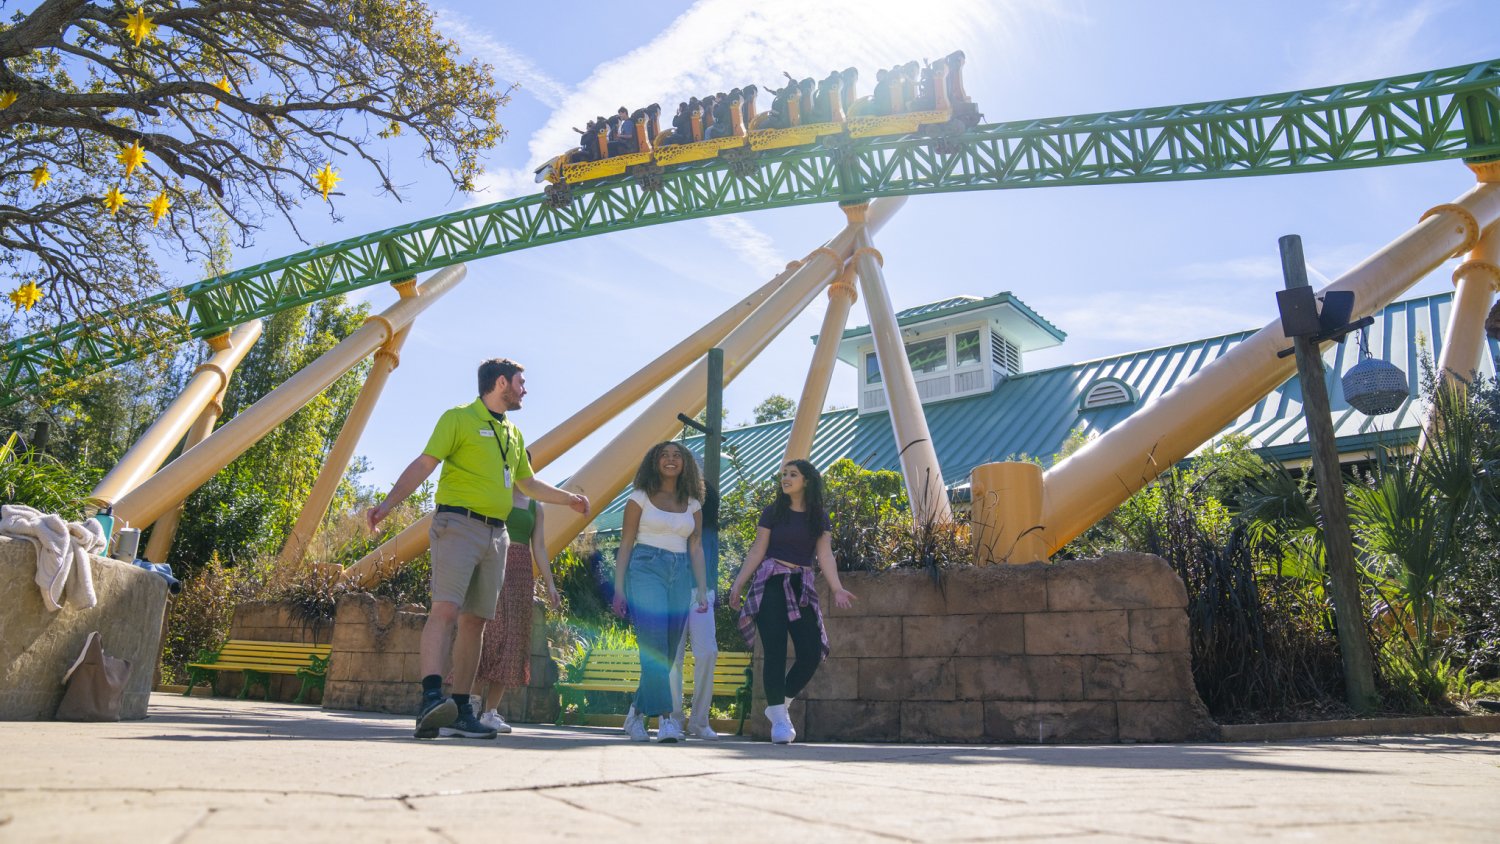 Group in front of Cheetah Hunt at Busch Gardens Tampa Bay